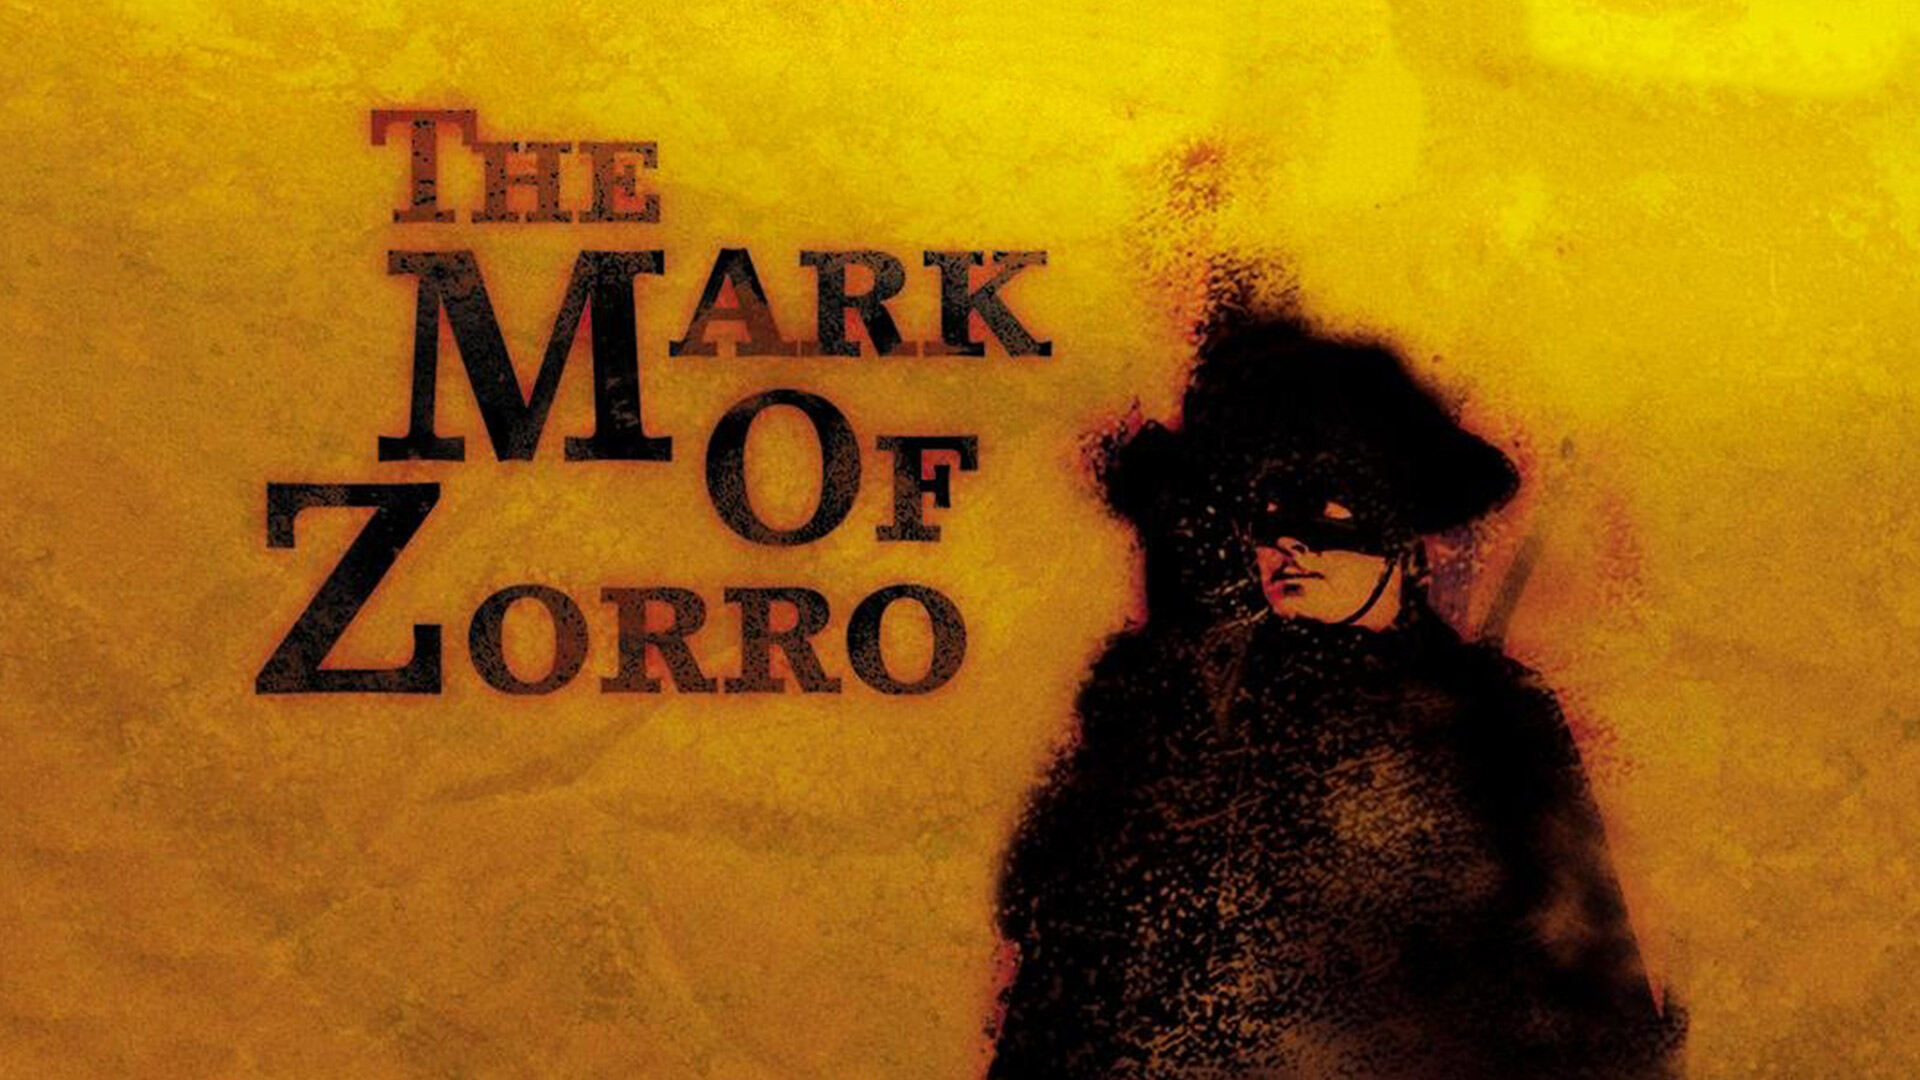 44 Facts about the movie The Mark of Zorro - Facts.net